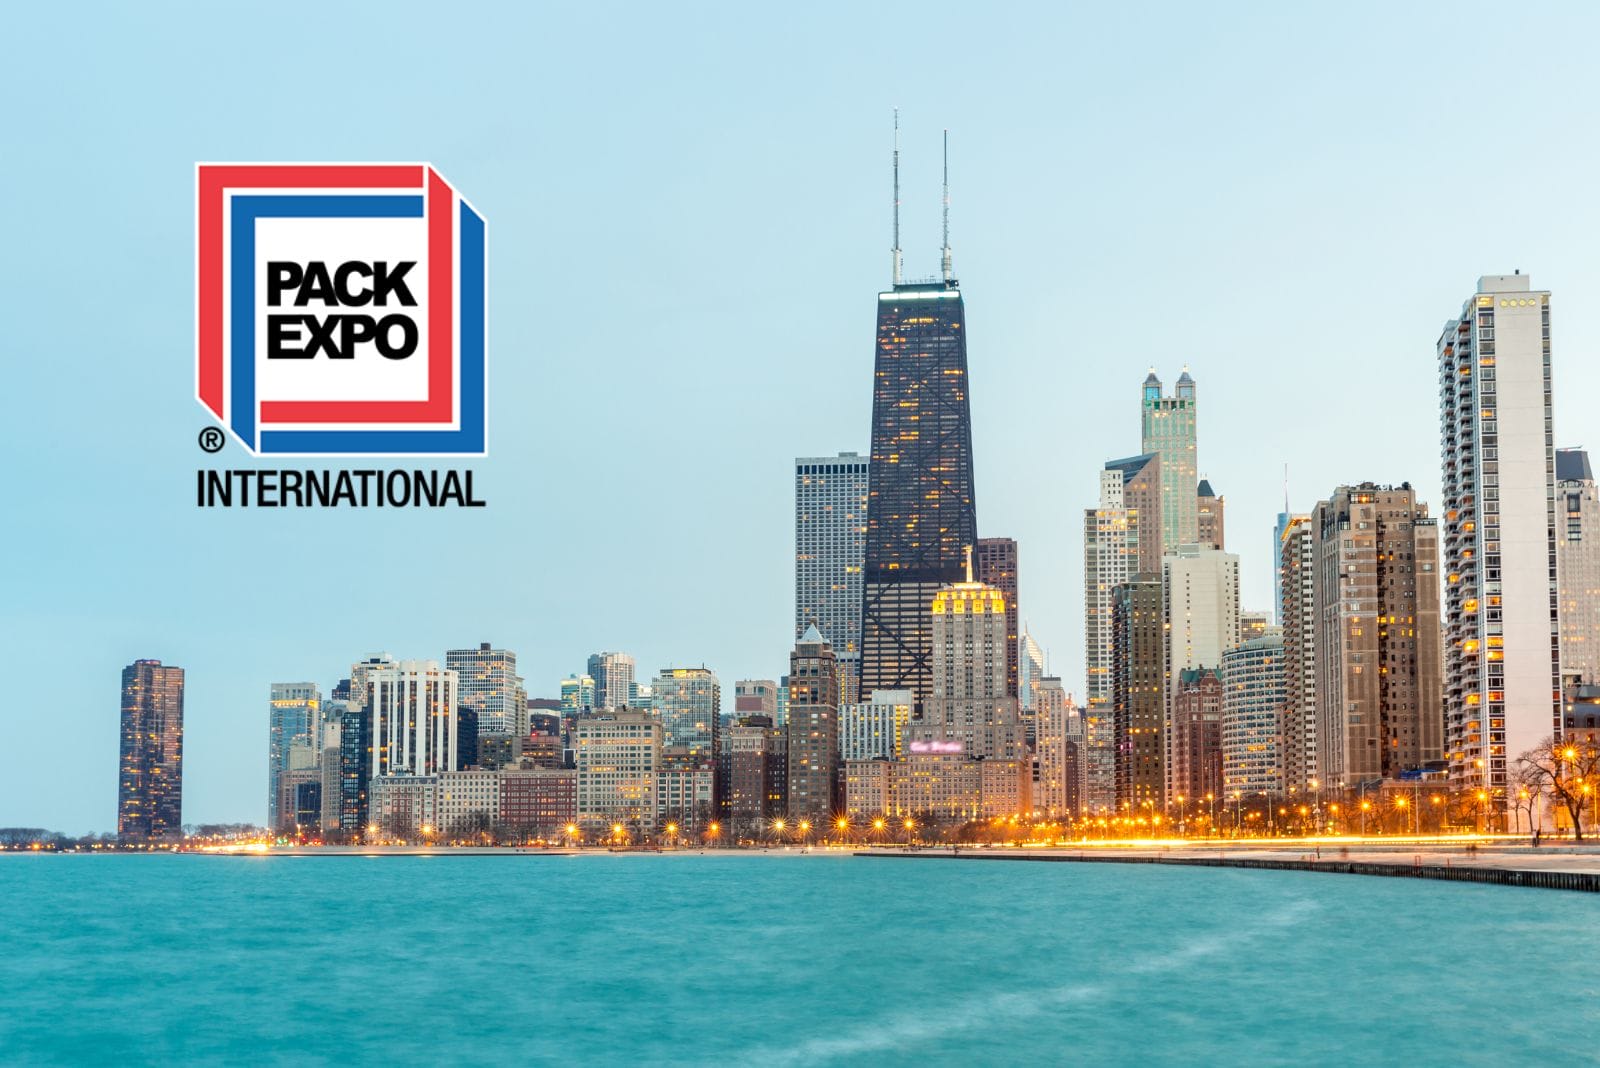 Chicago skyline with PACK EXPO International logo to the left